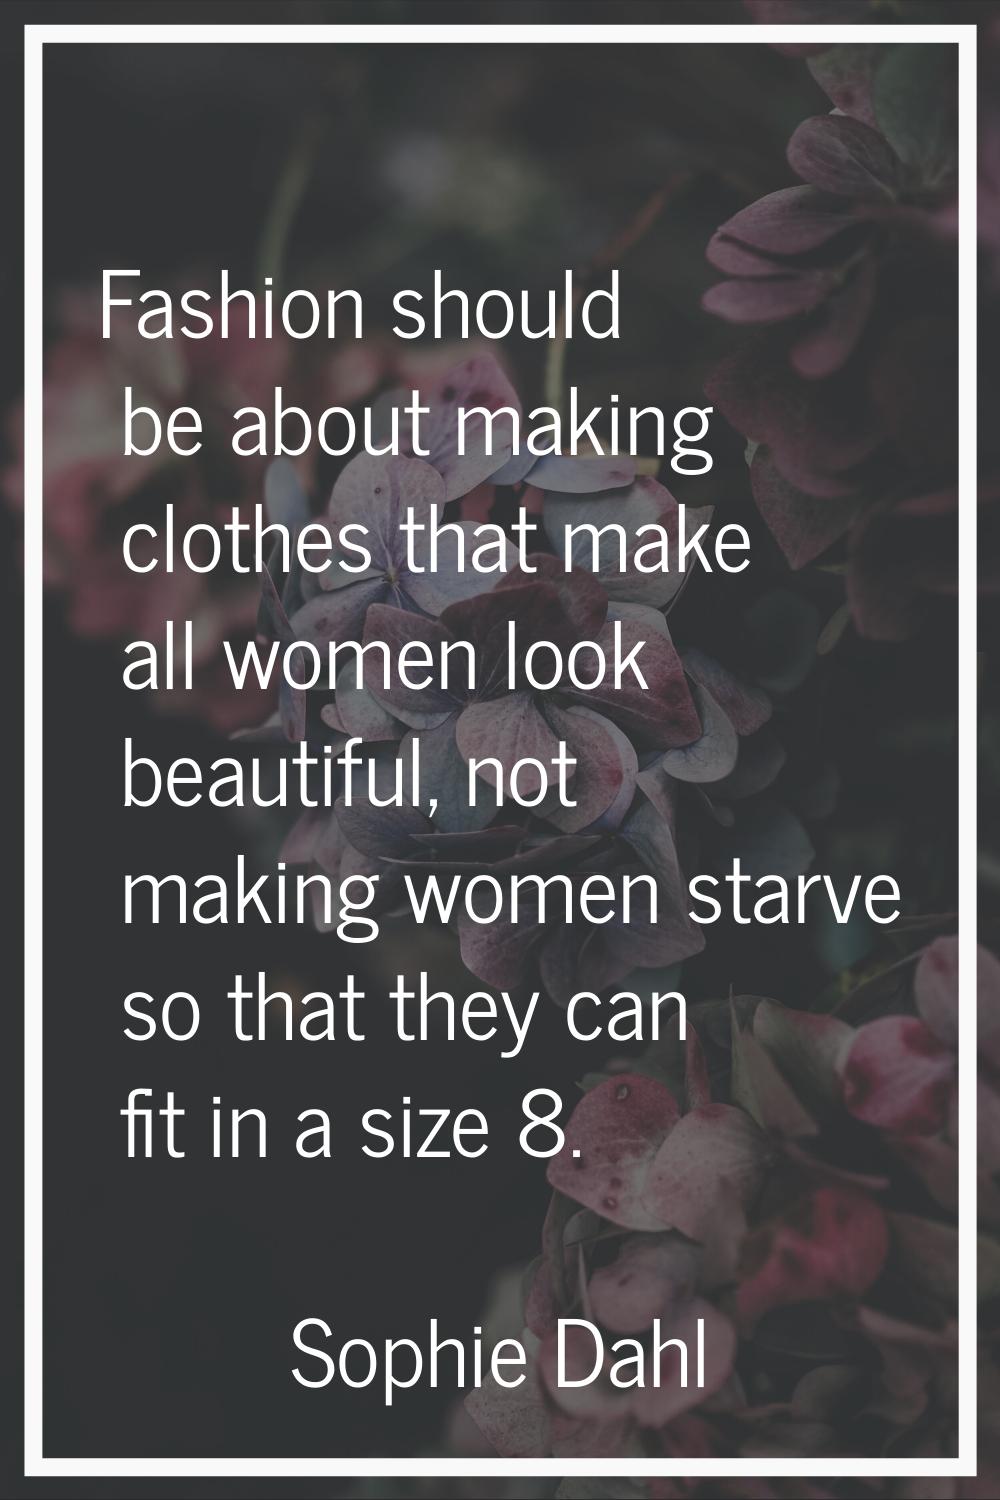 Fashion should be about making clothes that make all women look beautiful, not making women starve 